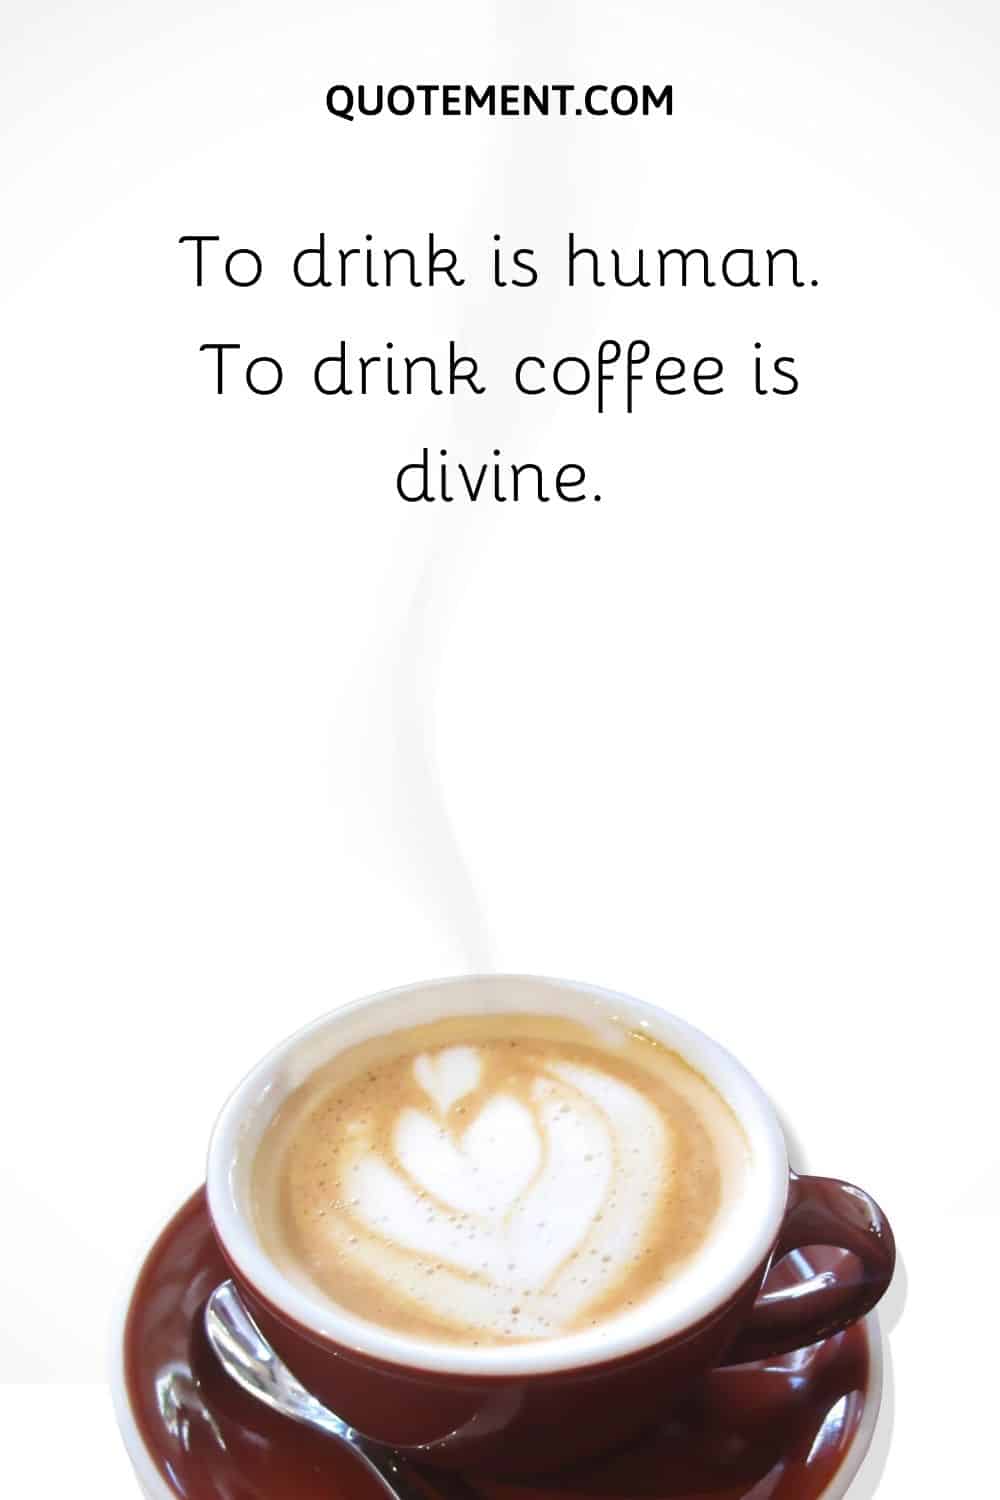 To drink is human. To drink coffee is divine